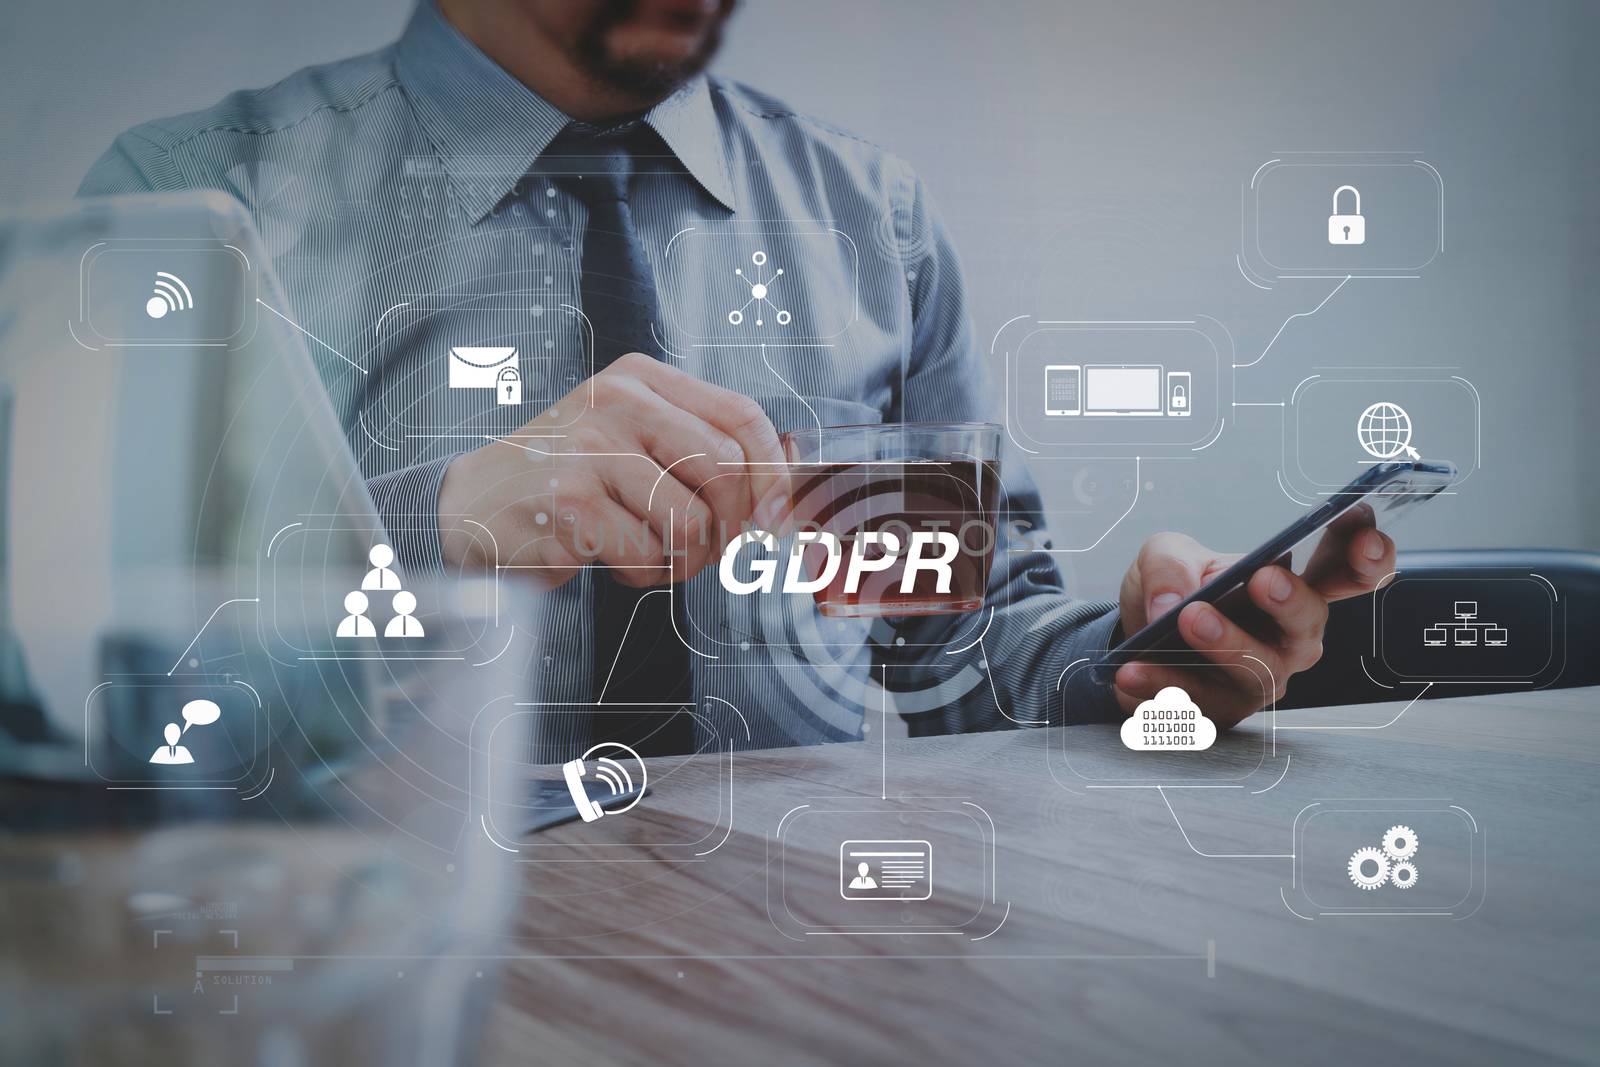 GDPR. Data Protection Regulation with Cyber security and privacy virtual diagram.success businessman hand using smart phone,digital tablet docking smart keyboard,coffee cup on wooden desk.